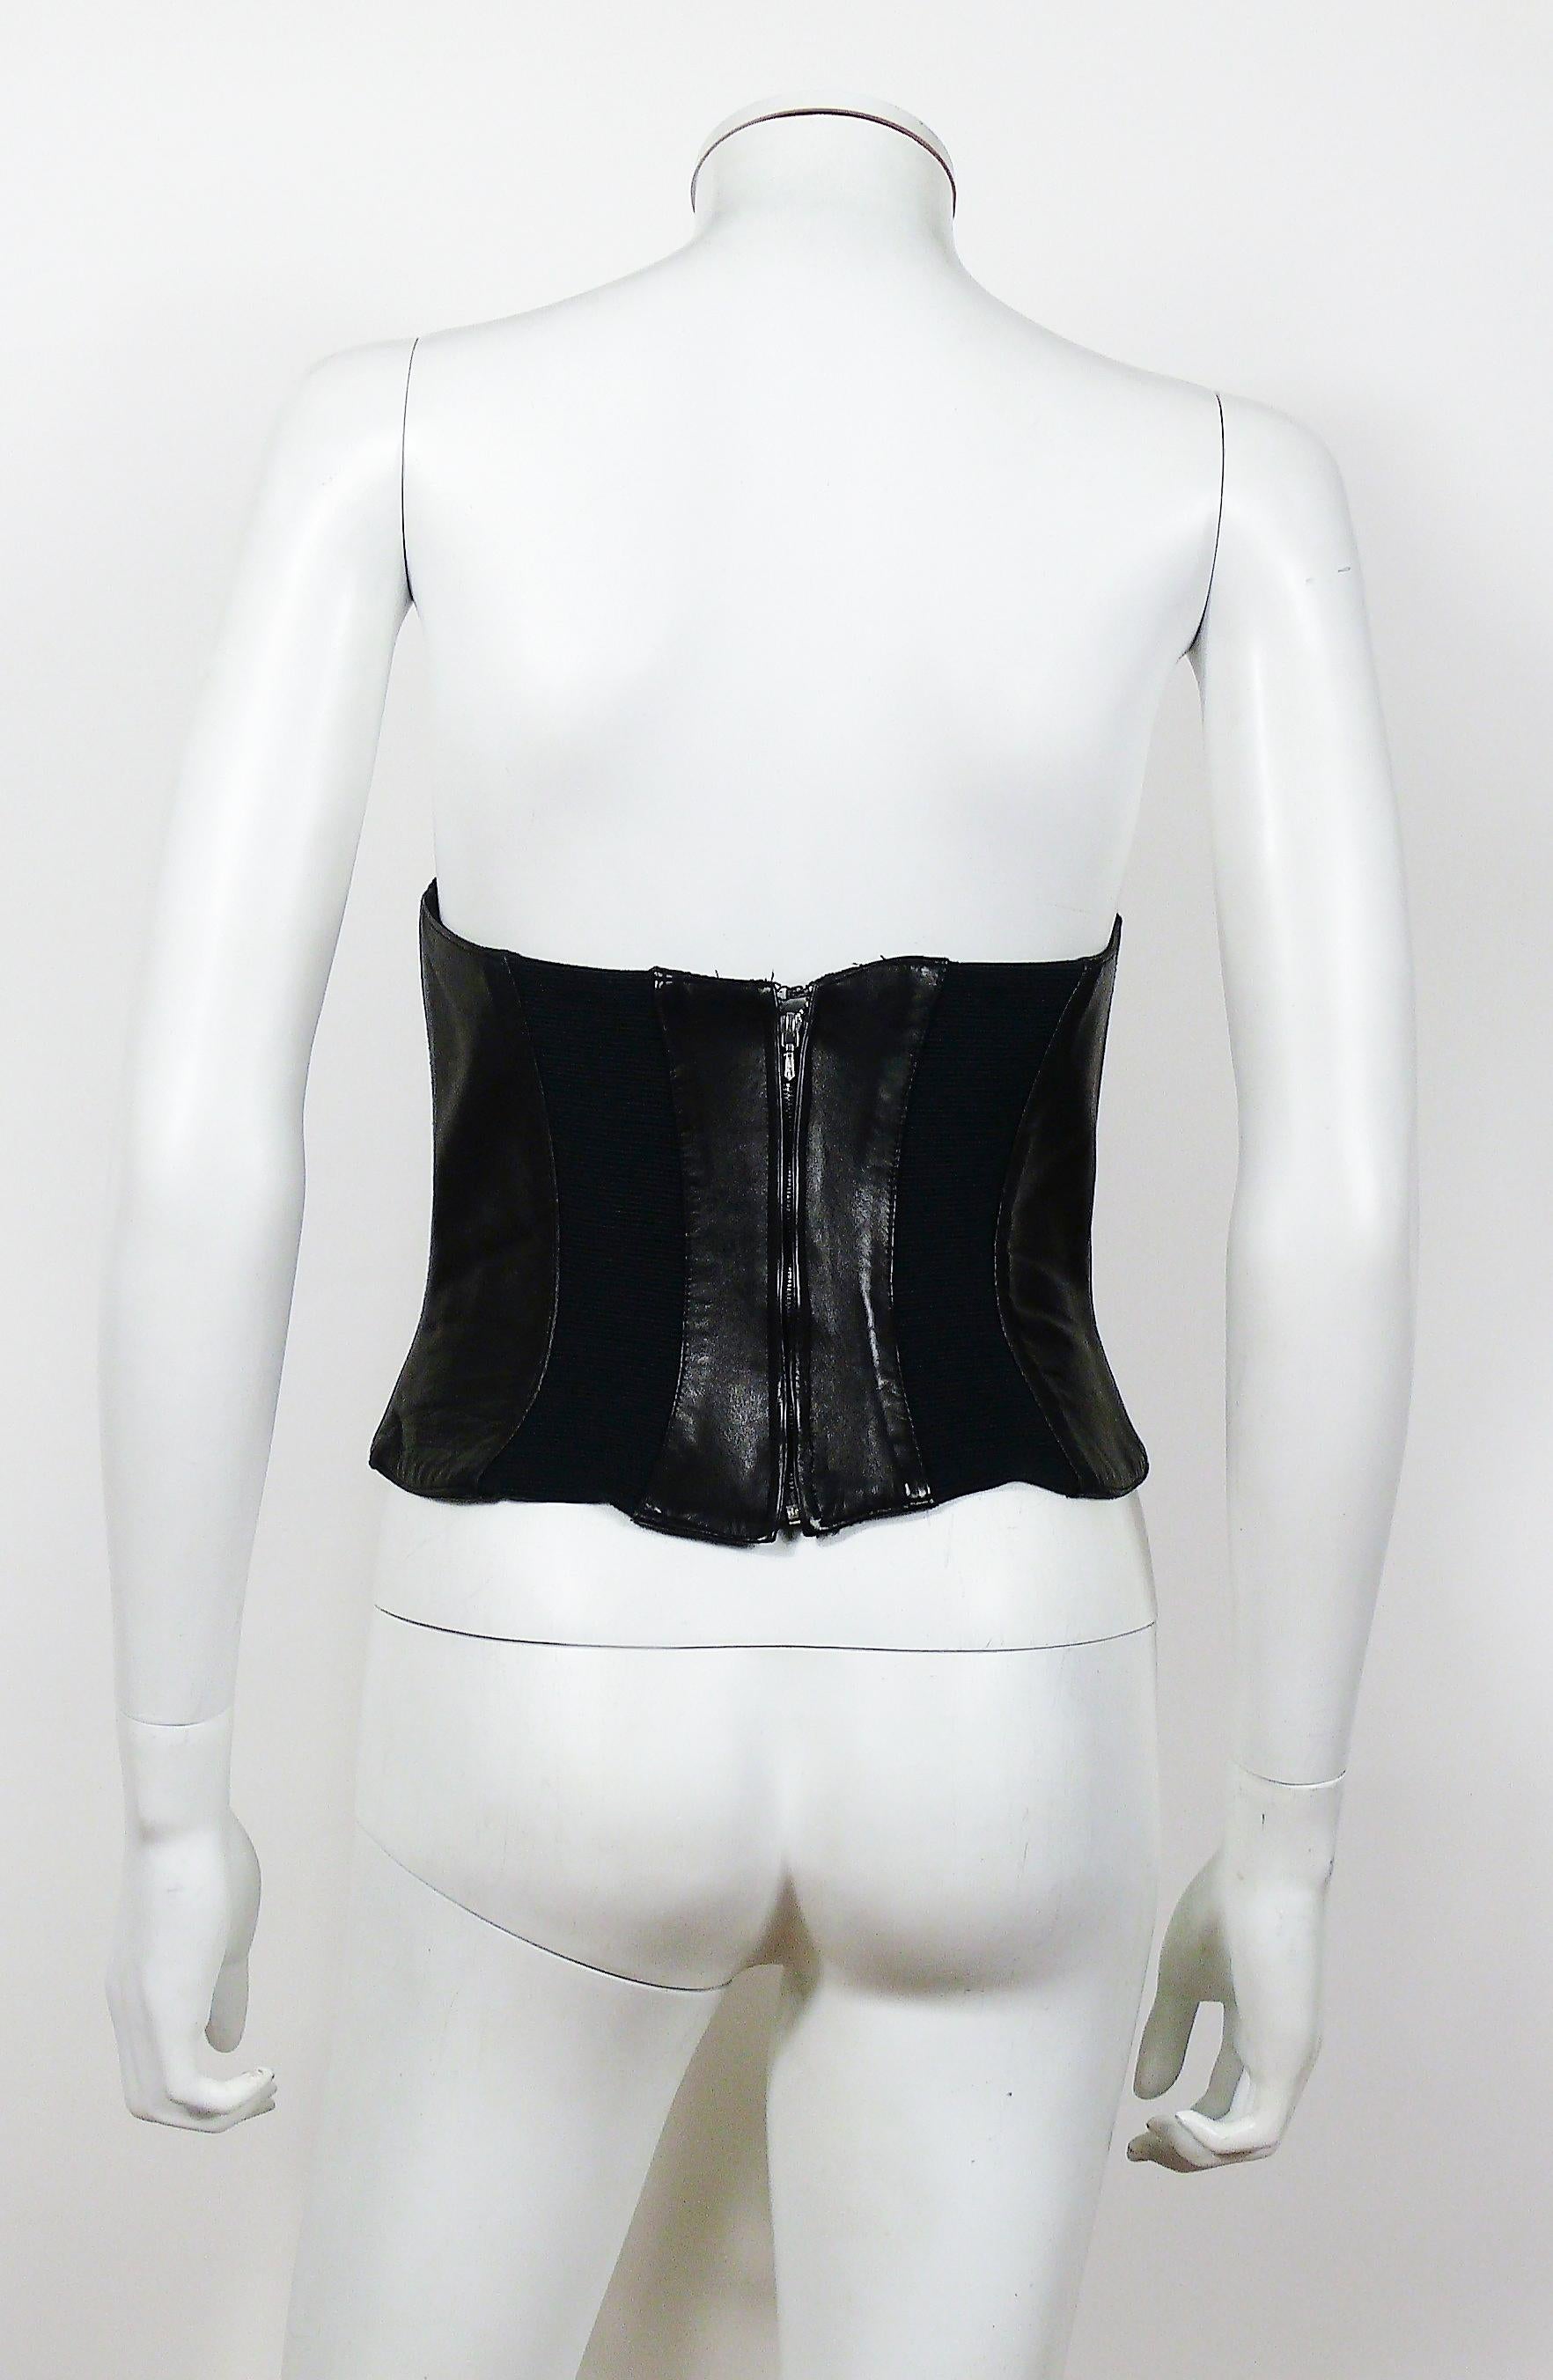 Women's Thierry Mugler Couture Iconic Vintage Black Leather Bustier Corset